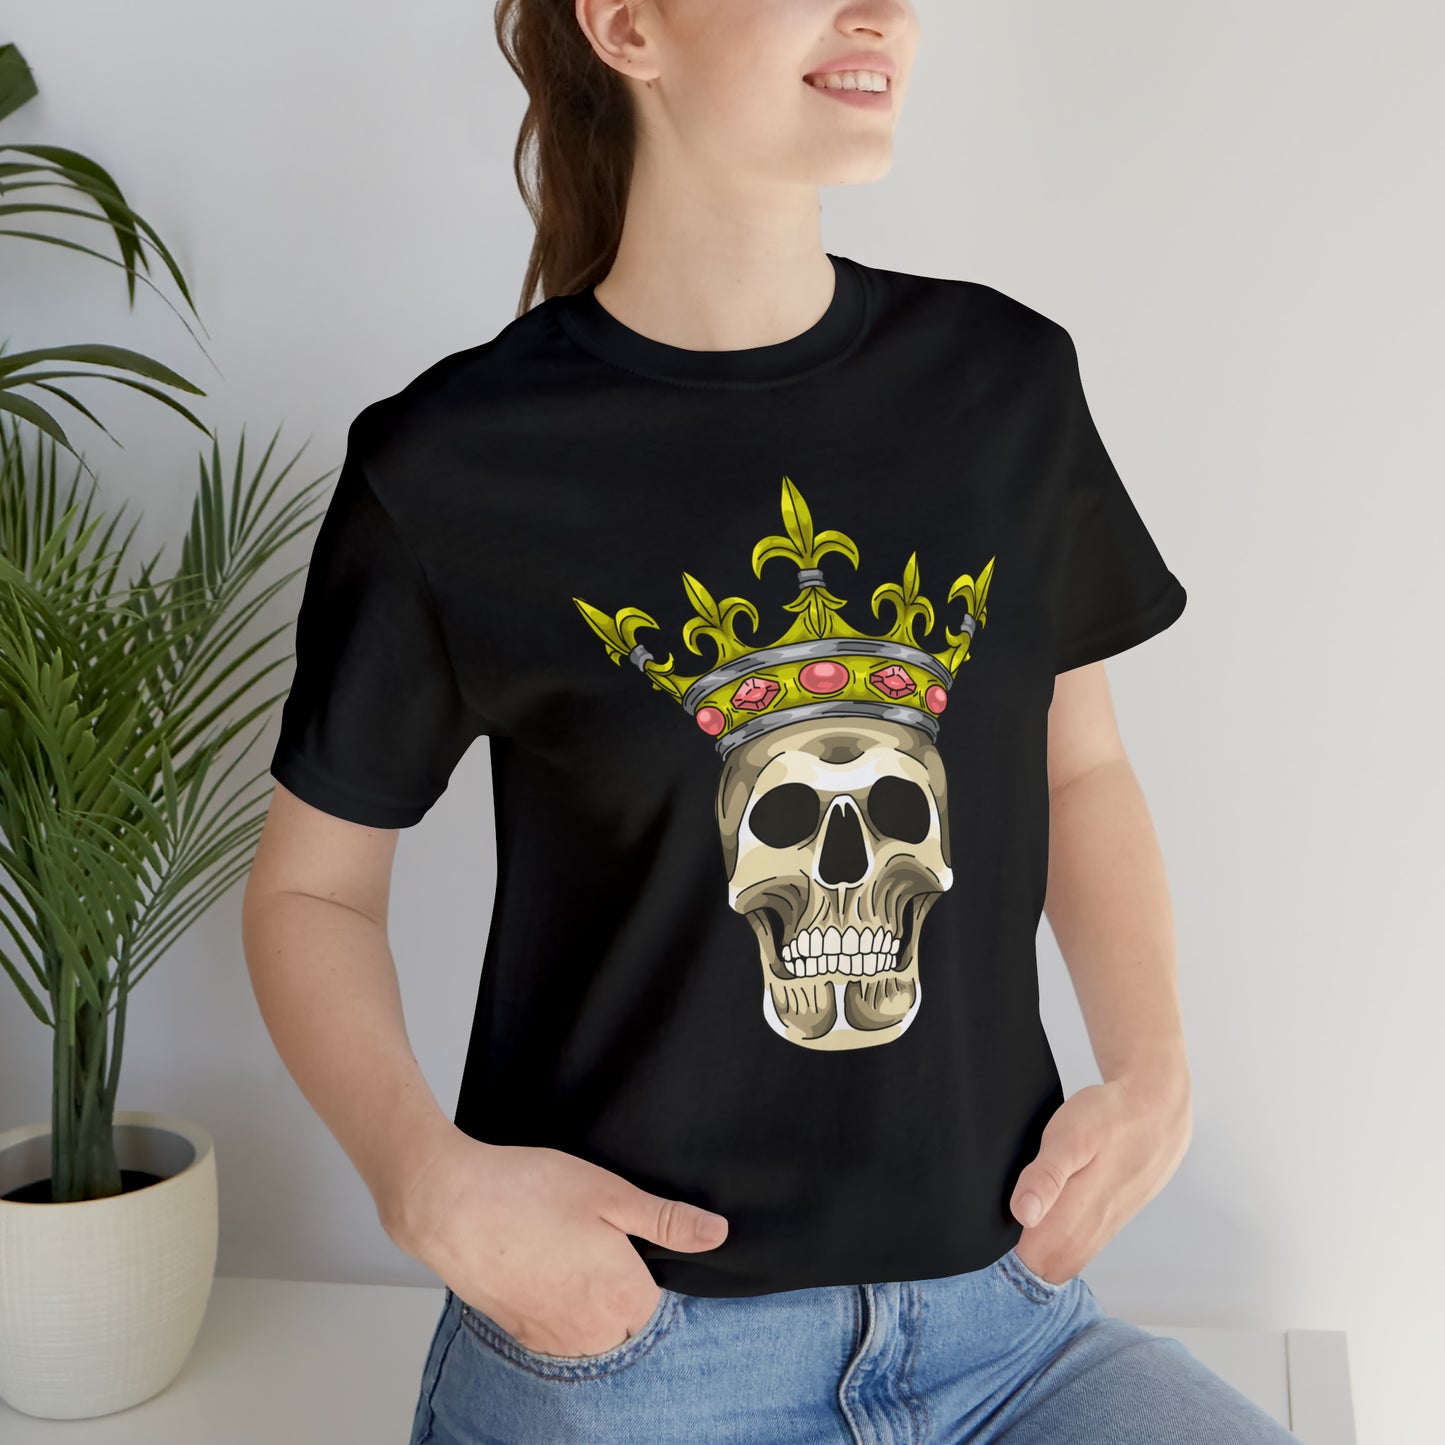 Skull with Crown Halloween T-Shirt, Crowned Skull Shirt, Skull Crown Tee, Skeleton T-Shirt, Skull gift